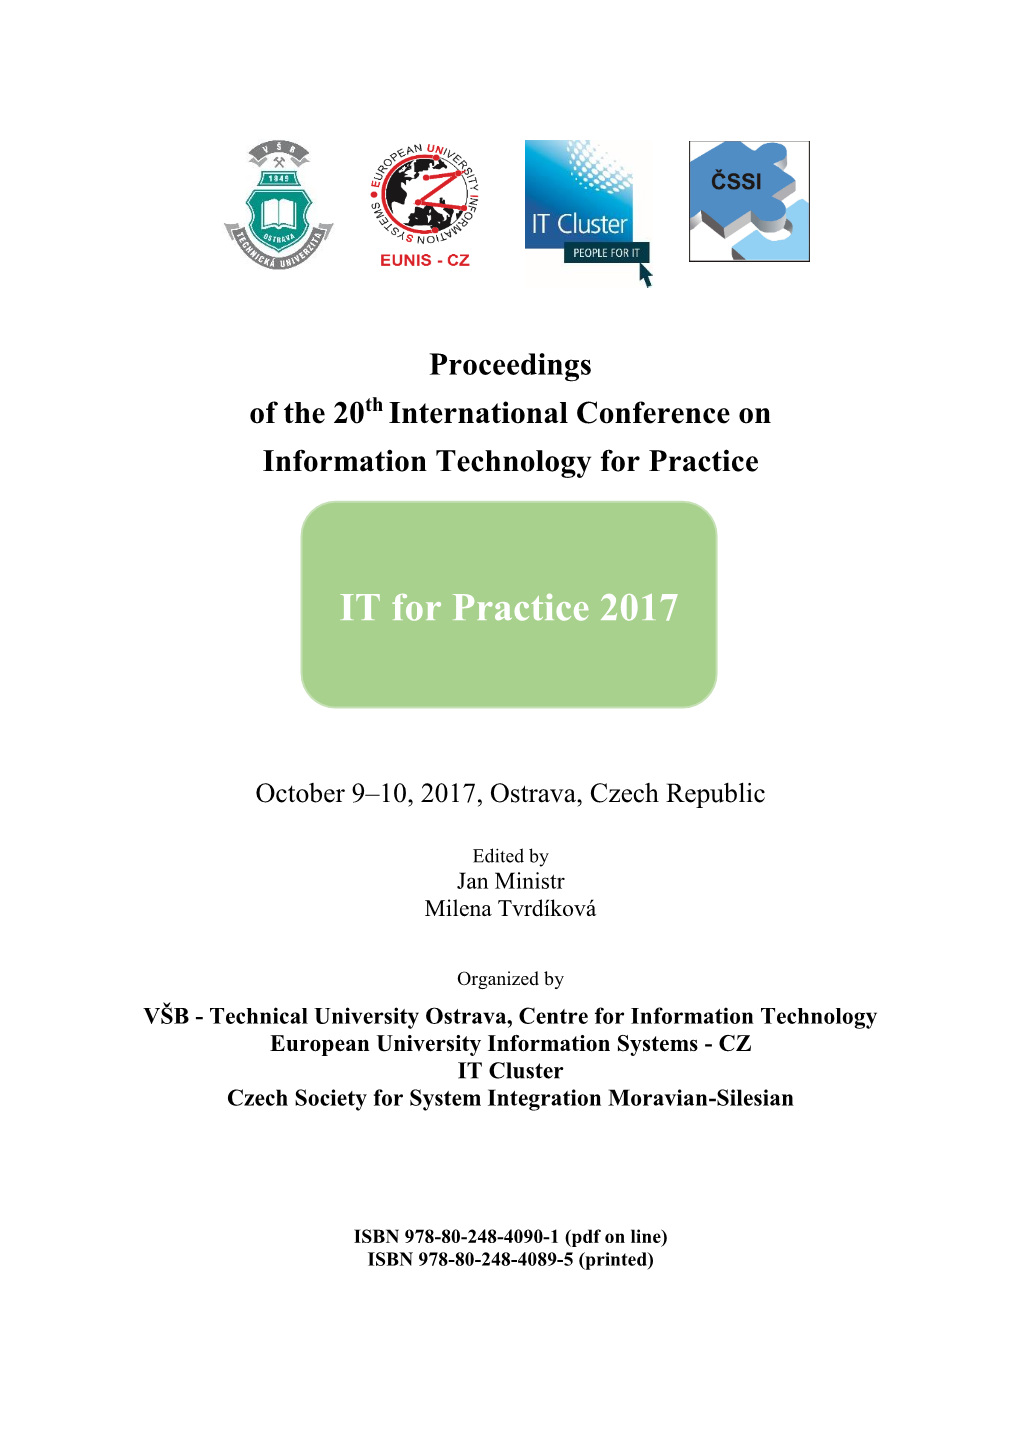 IT for Practice 2017